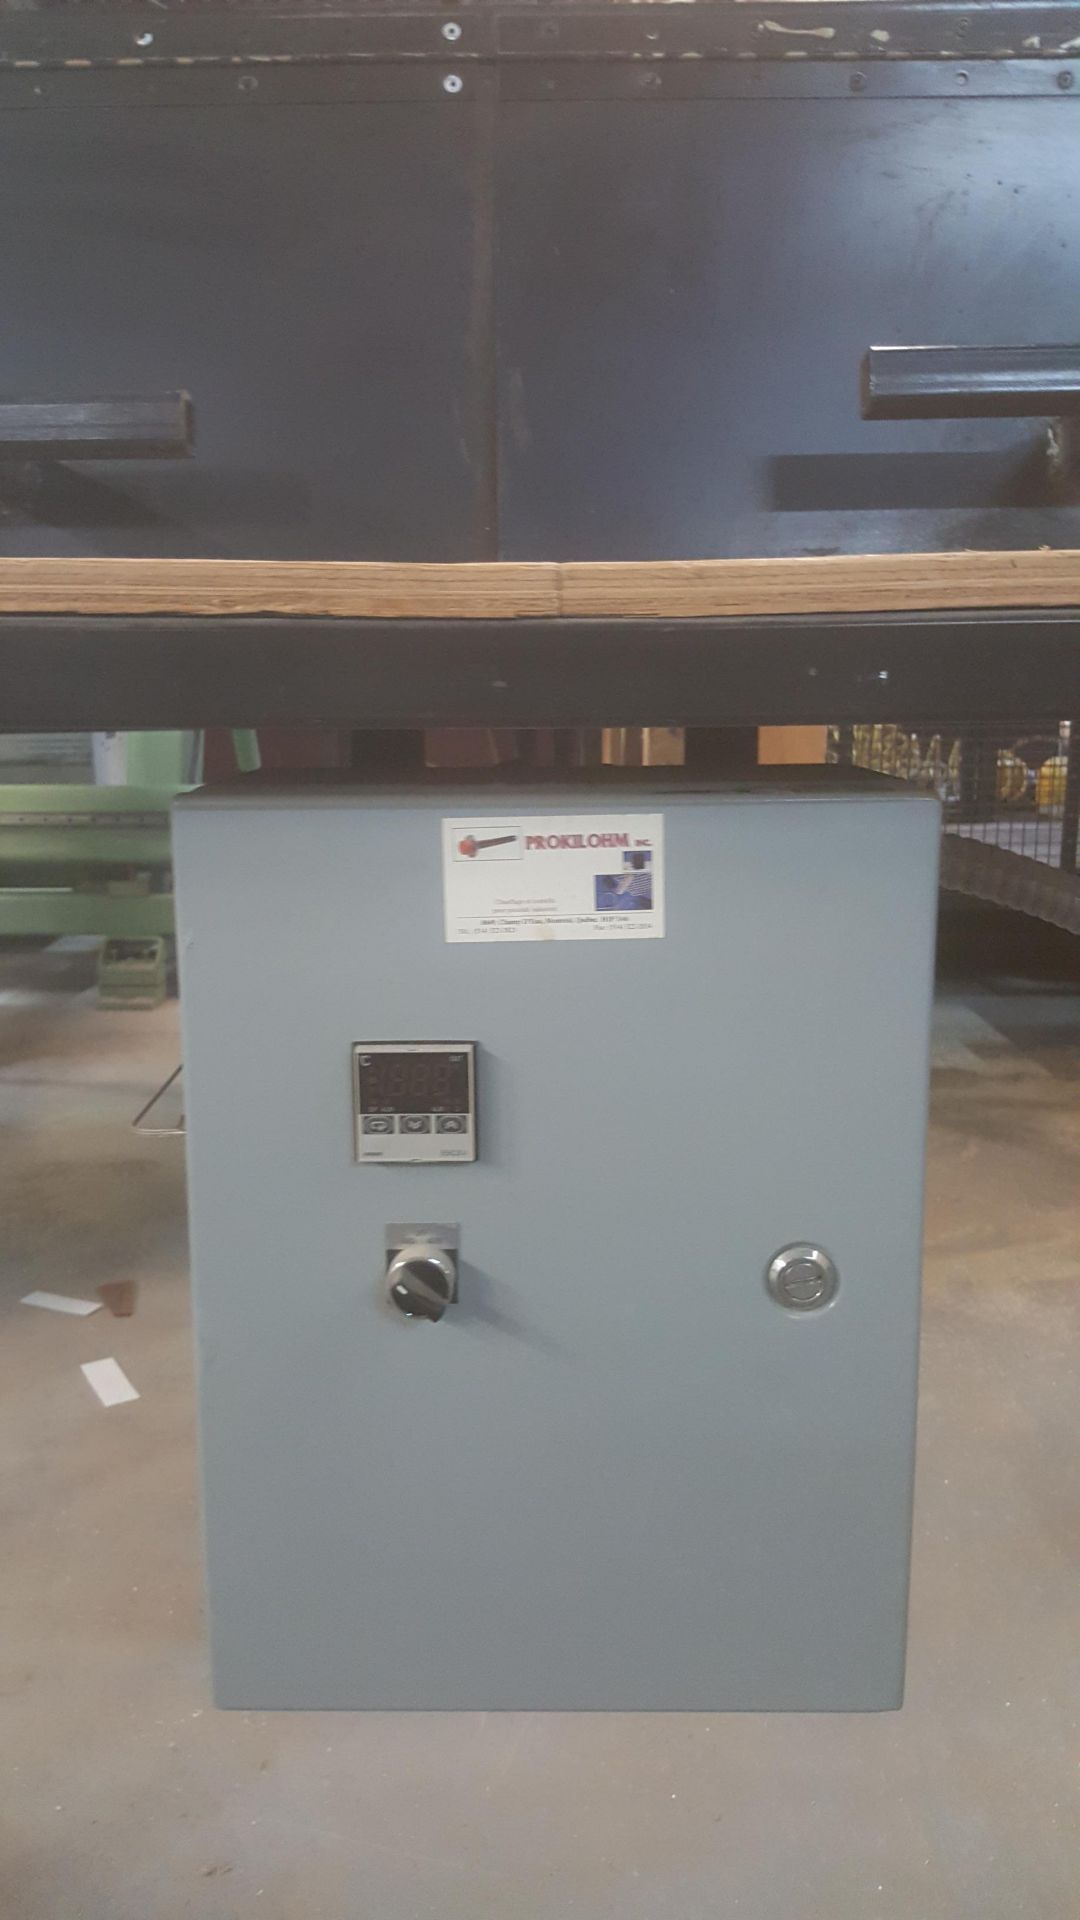 PVC Heater/Bender Oven on steel table. Dimensions including Oven and Base are 192"x24"x53"H - Image 4 of 8